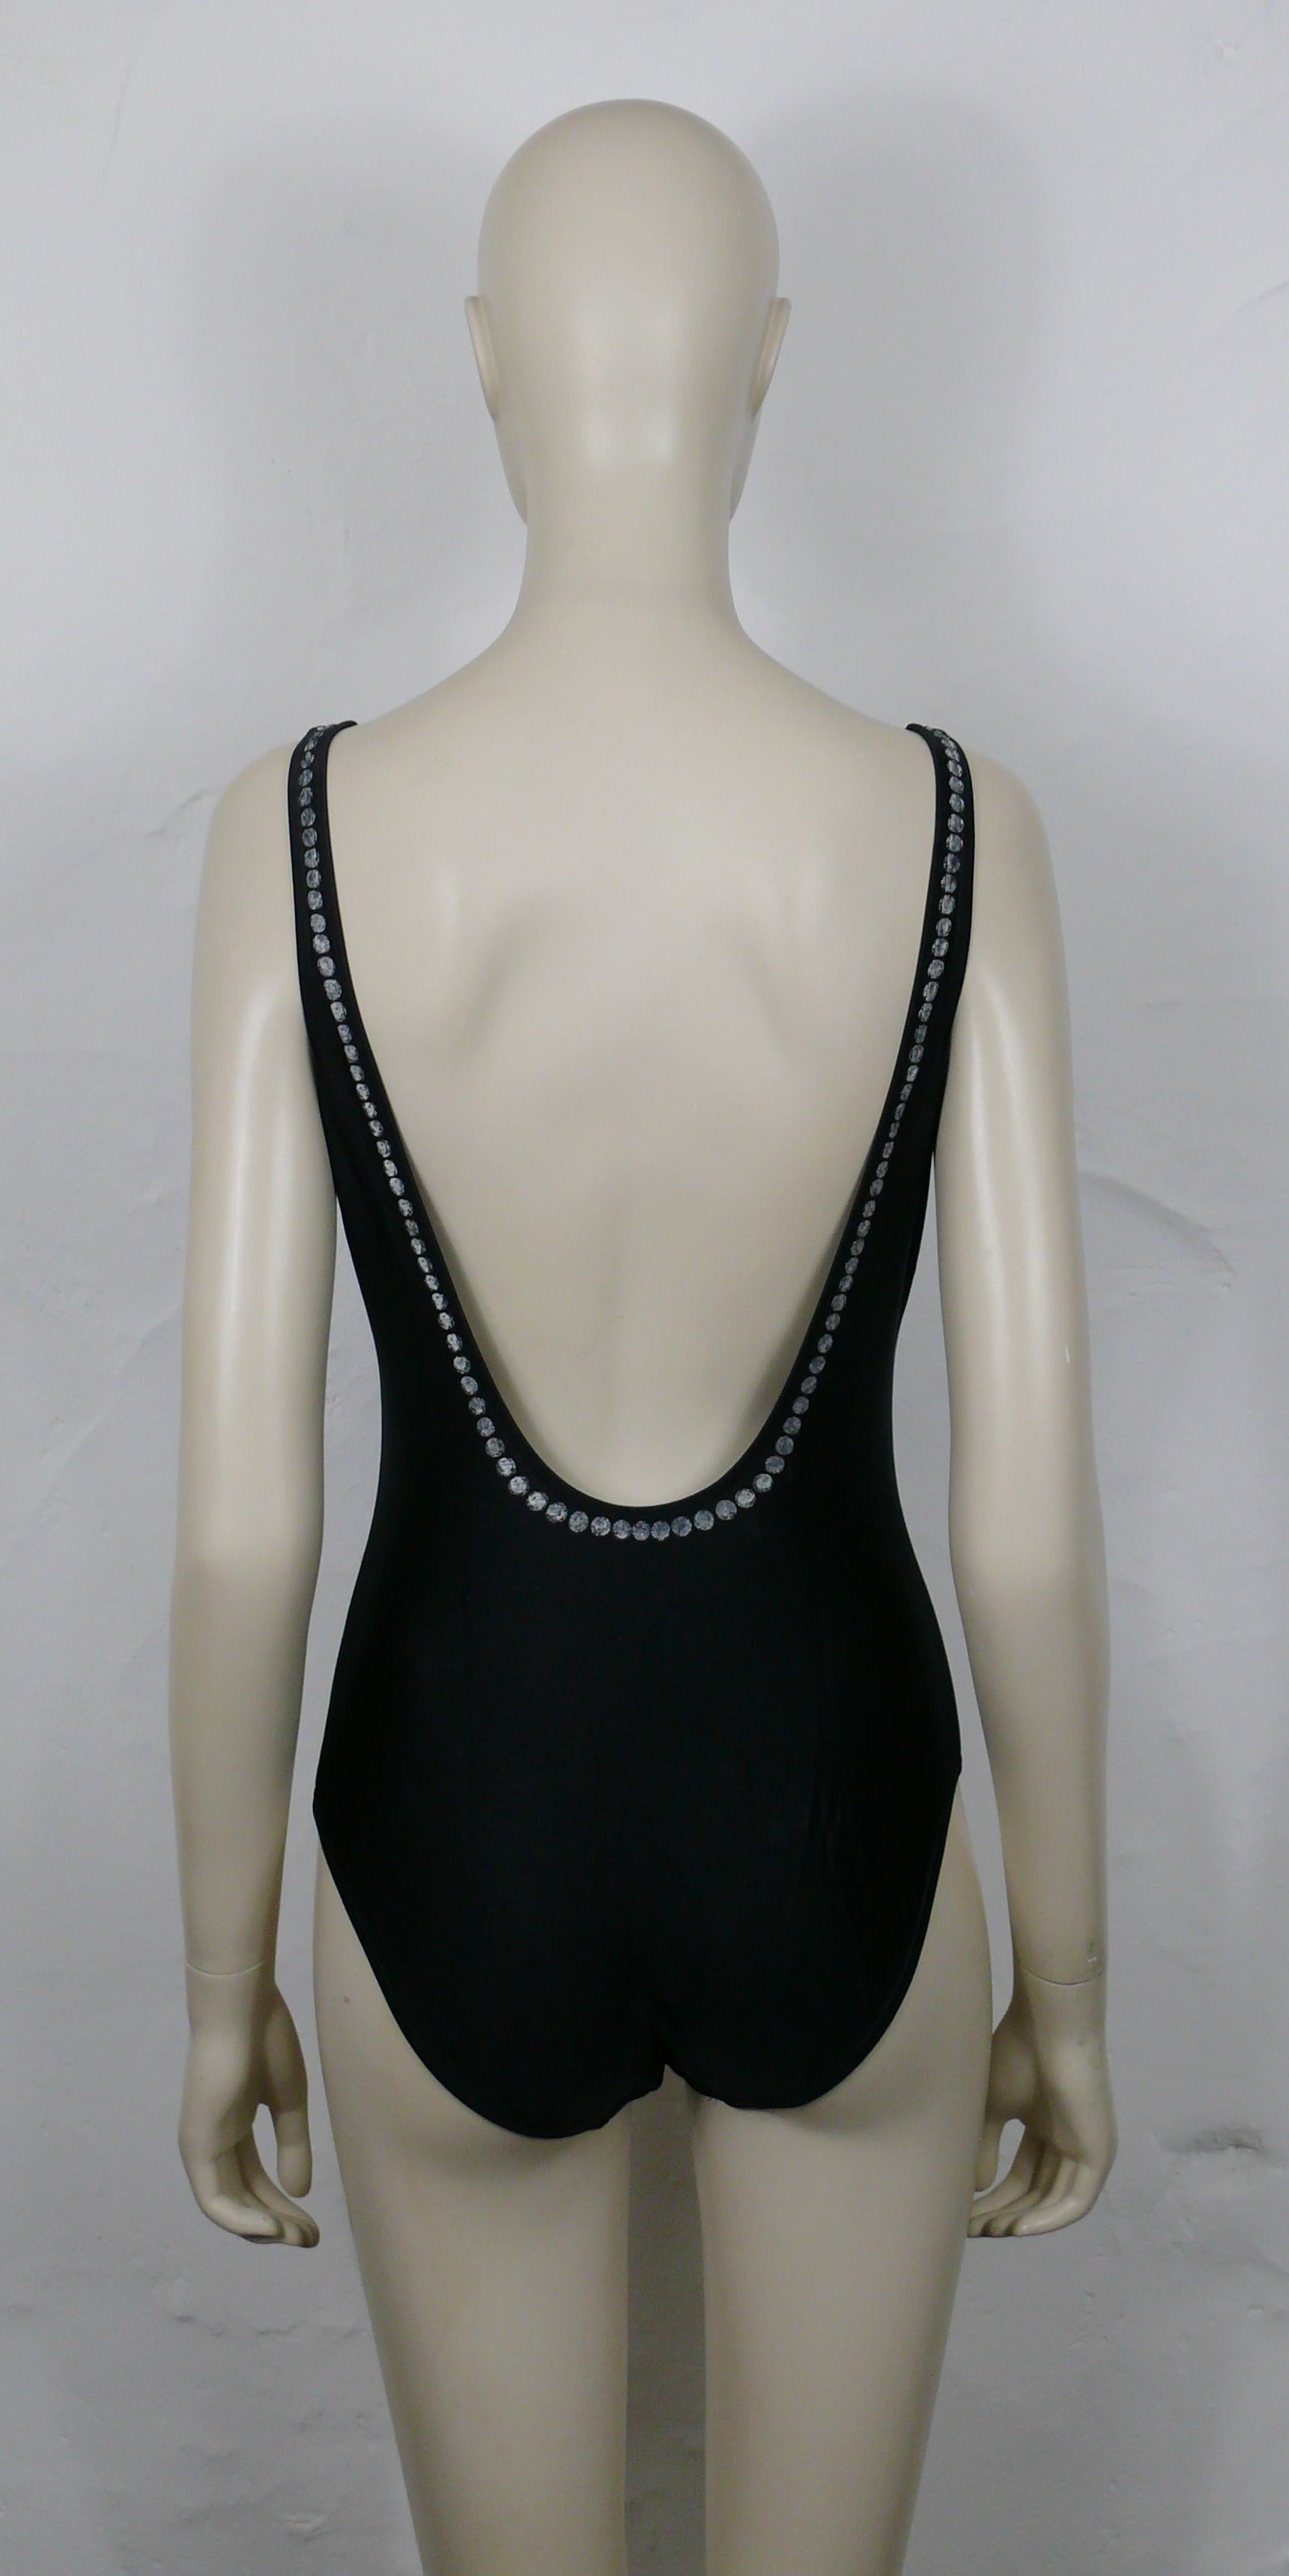 CHANEL Vintage 1997 Black One-Pïece Swimsuit with Printed Pearls Trompe L'oeil For Sale 1